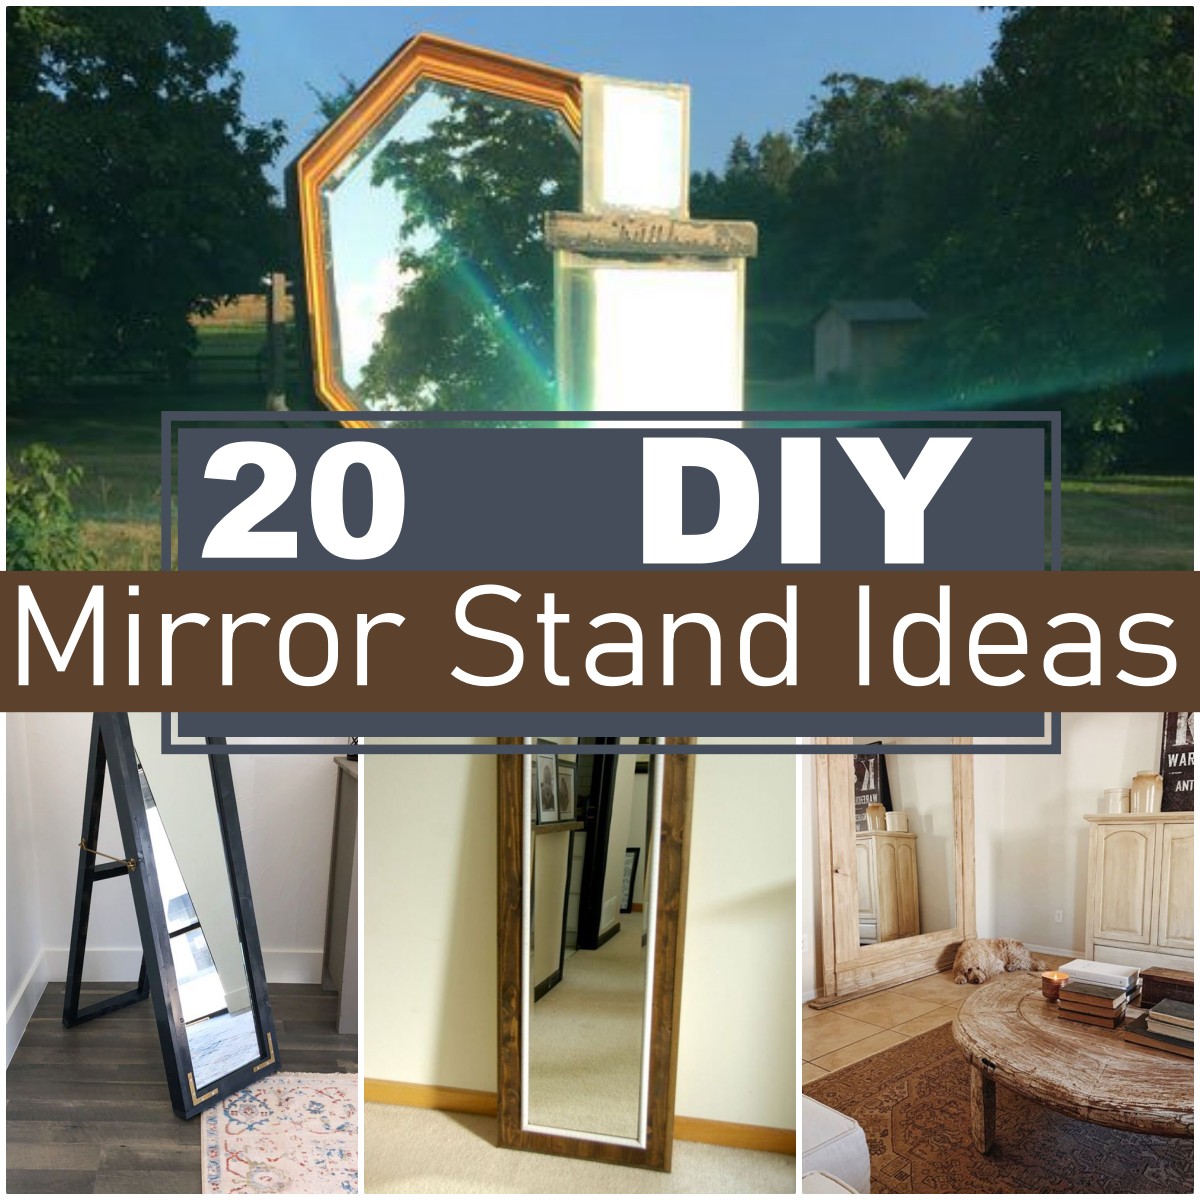 Easy To Make Mirror Stand Out Of Pallet Wood (DIY Easel) 